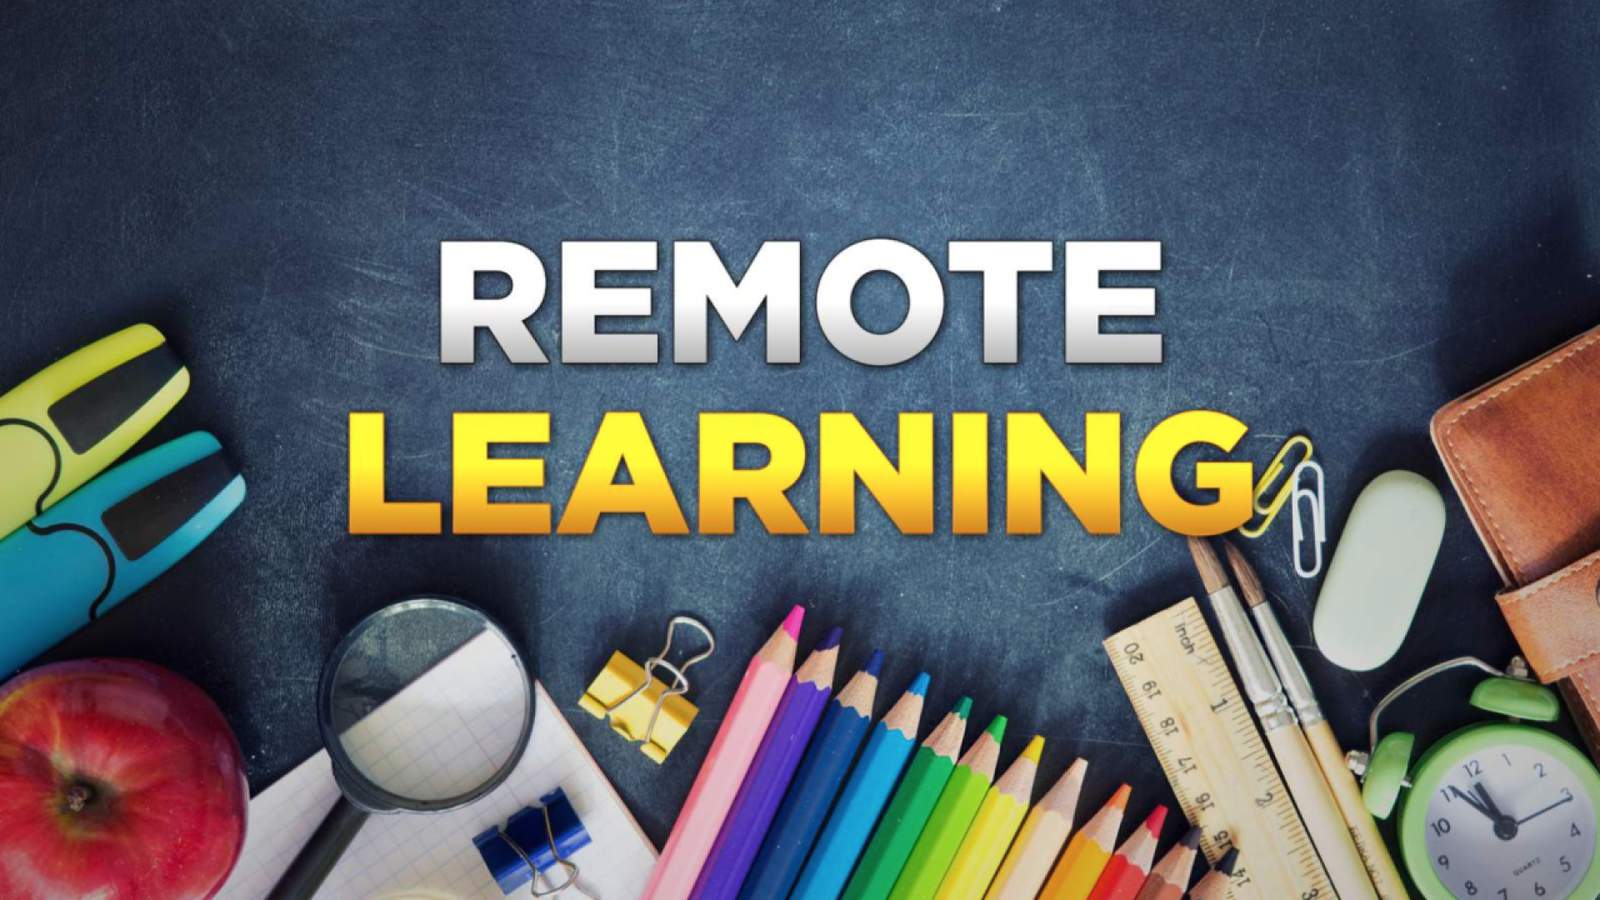 Texas Education Agency releases guidelines on remote learning, announces it will distribute masks, thermometers